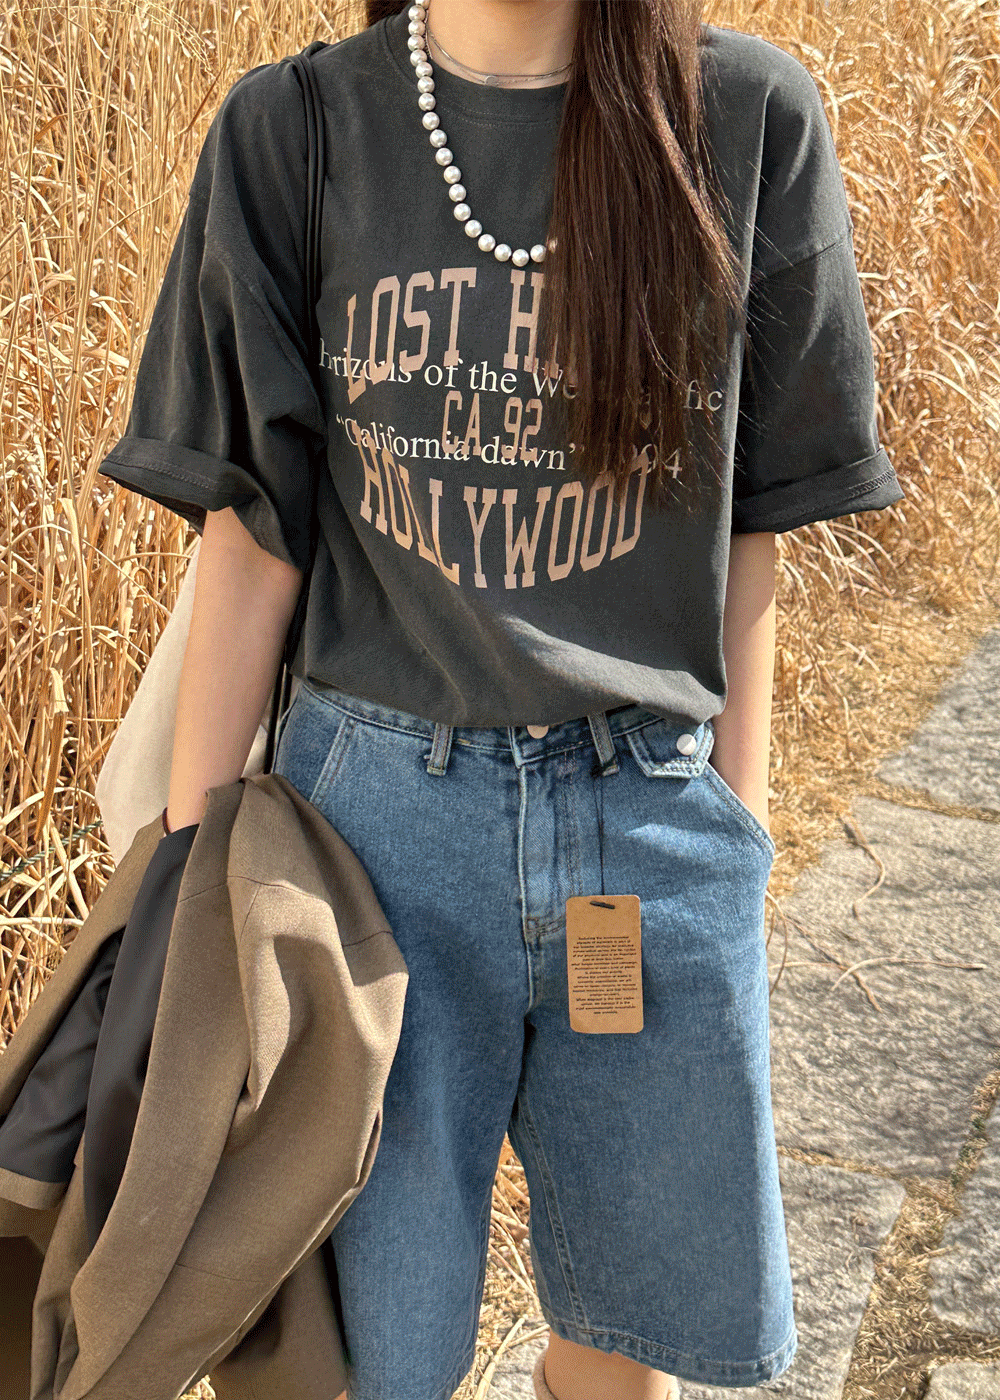 Lost hill printing tee